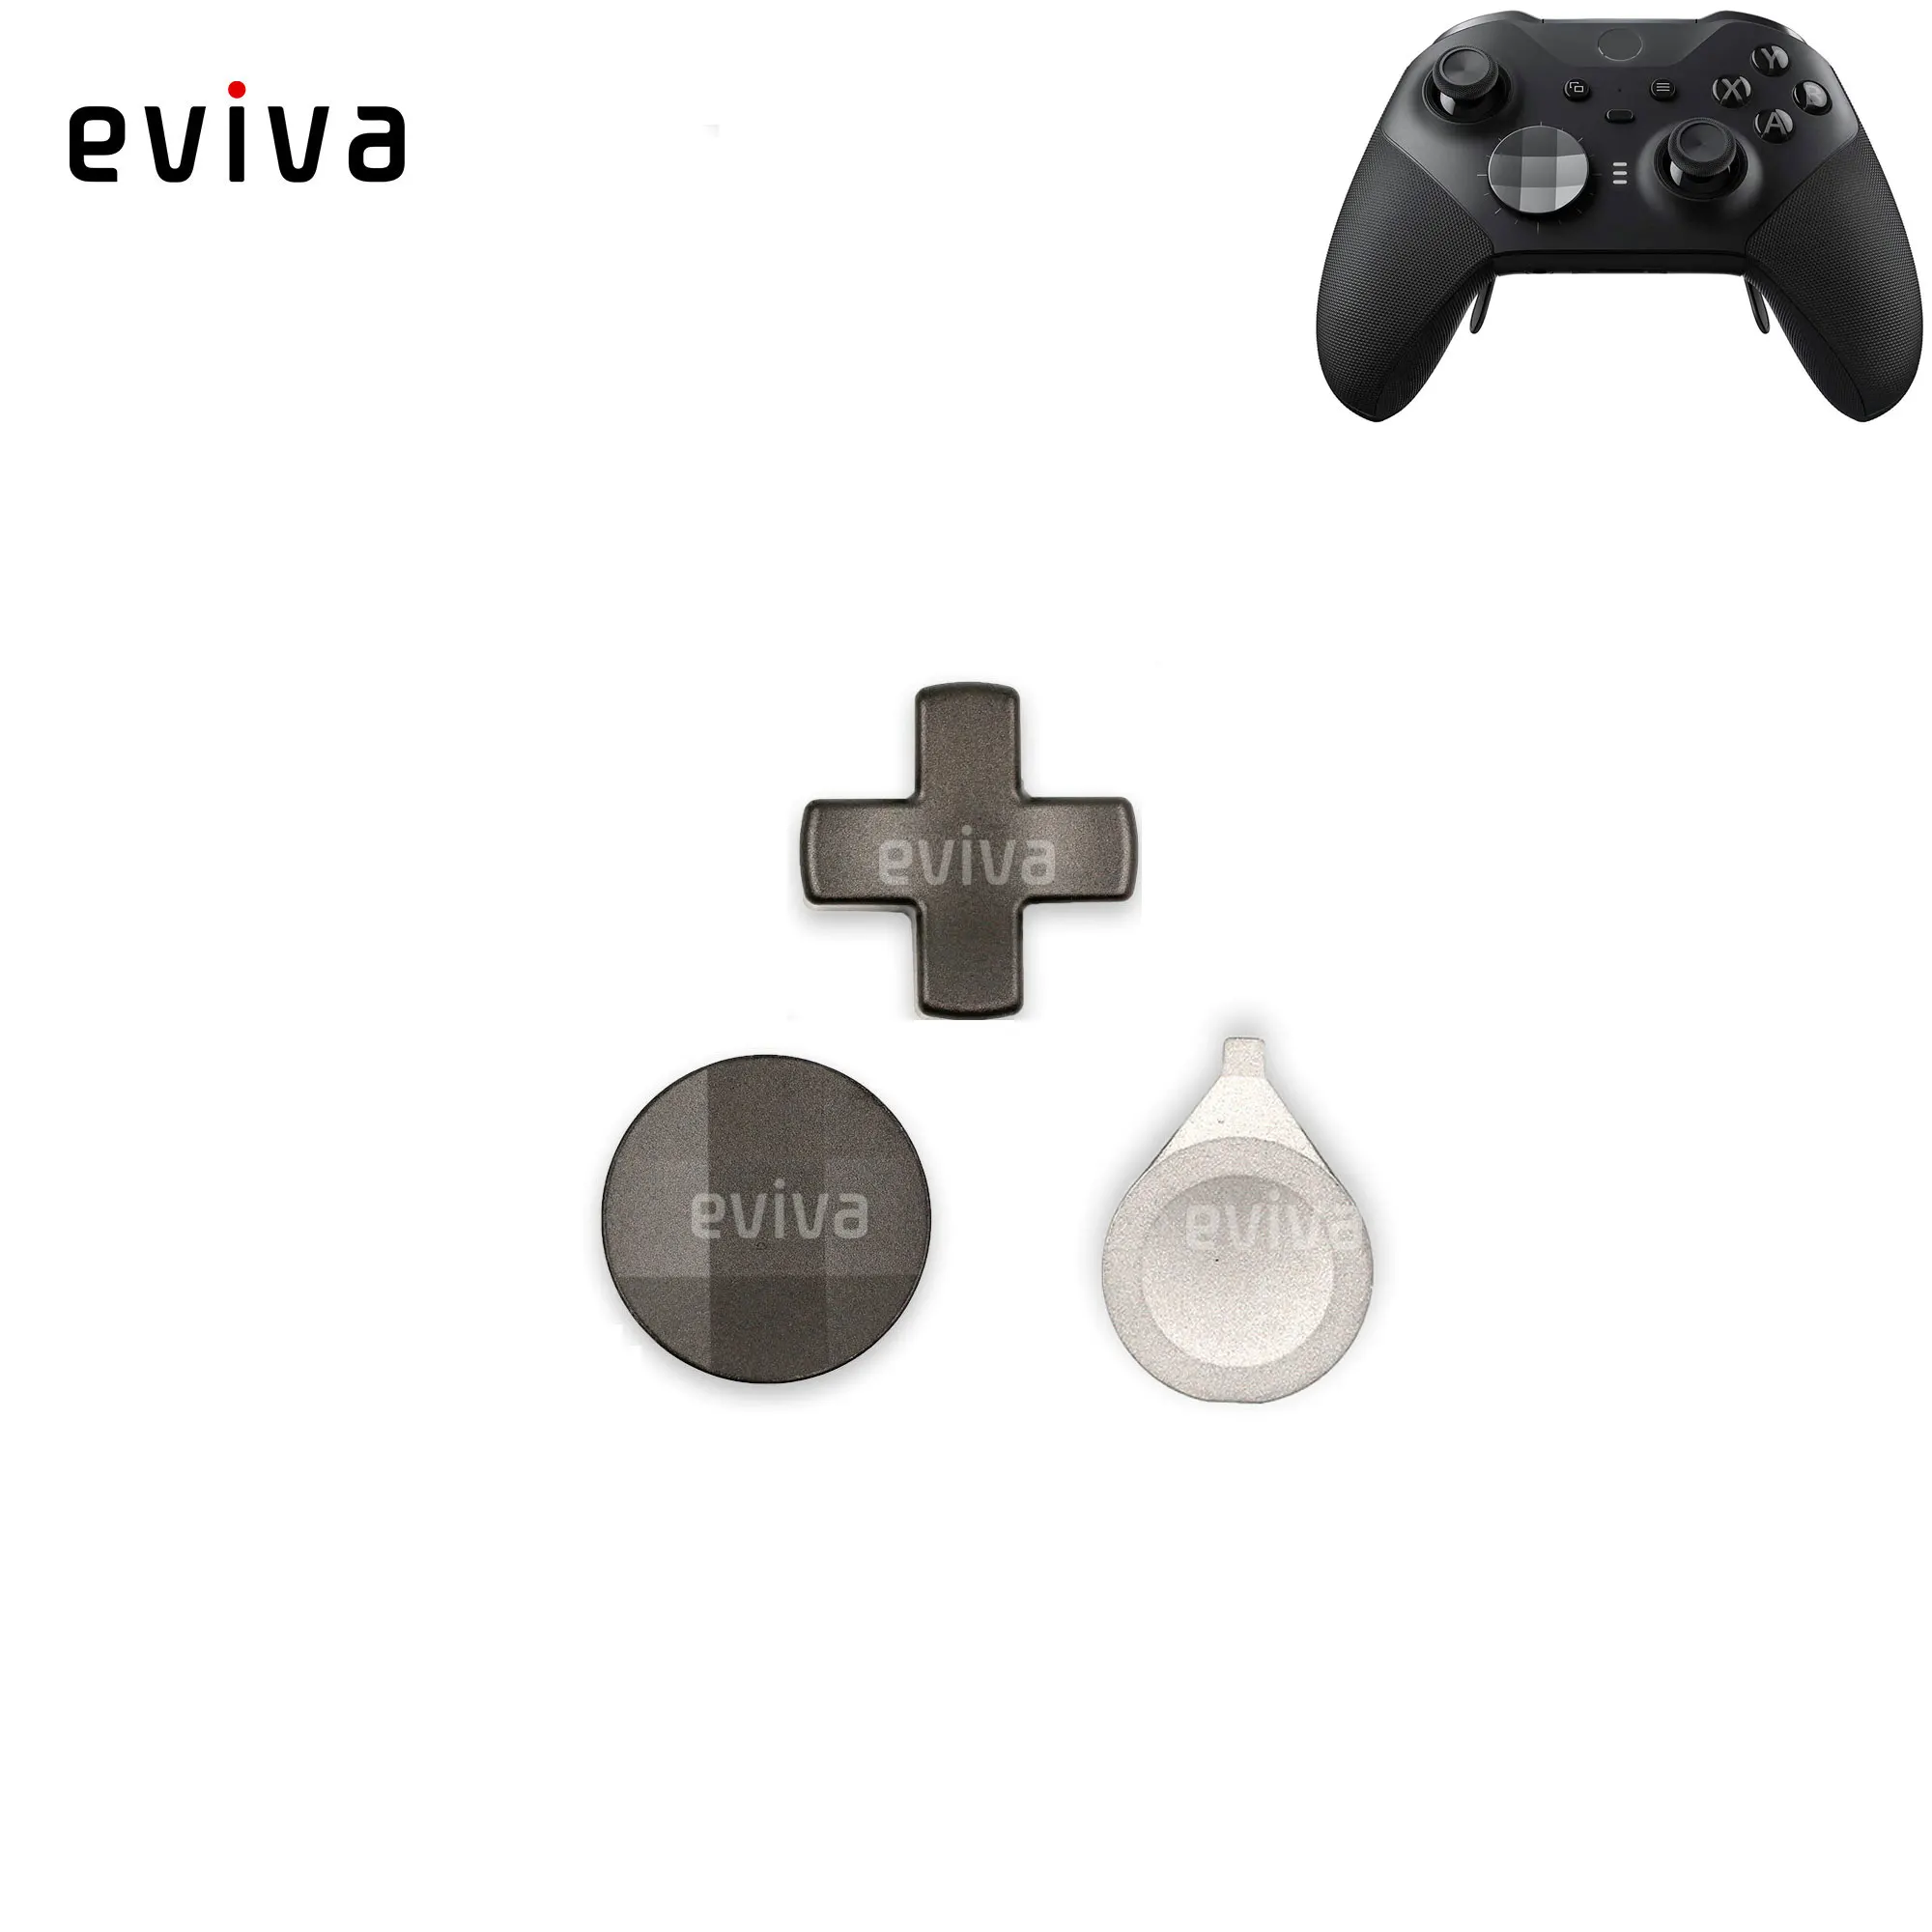 2 D-pads with Carry Case for Xbox One Elite Series 2 Controller 4 Trigger Paddles Silver Mcbazel Xbox One Elite Series 2 Controller 13 in 1 Replacement Tools 6 Thumbsticks Grips